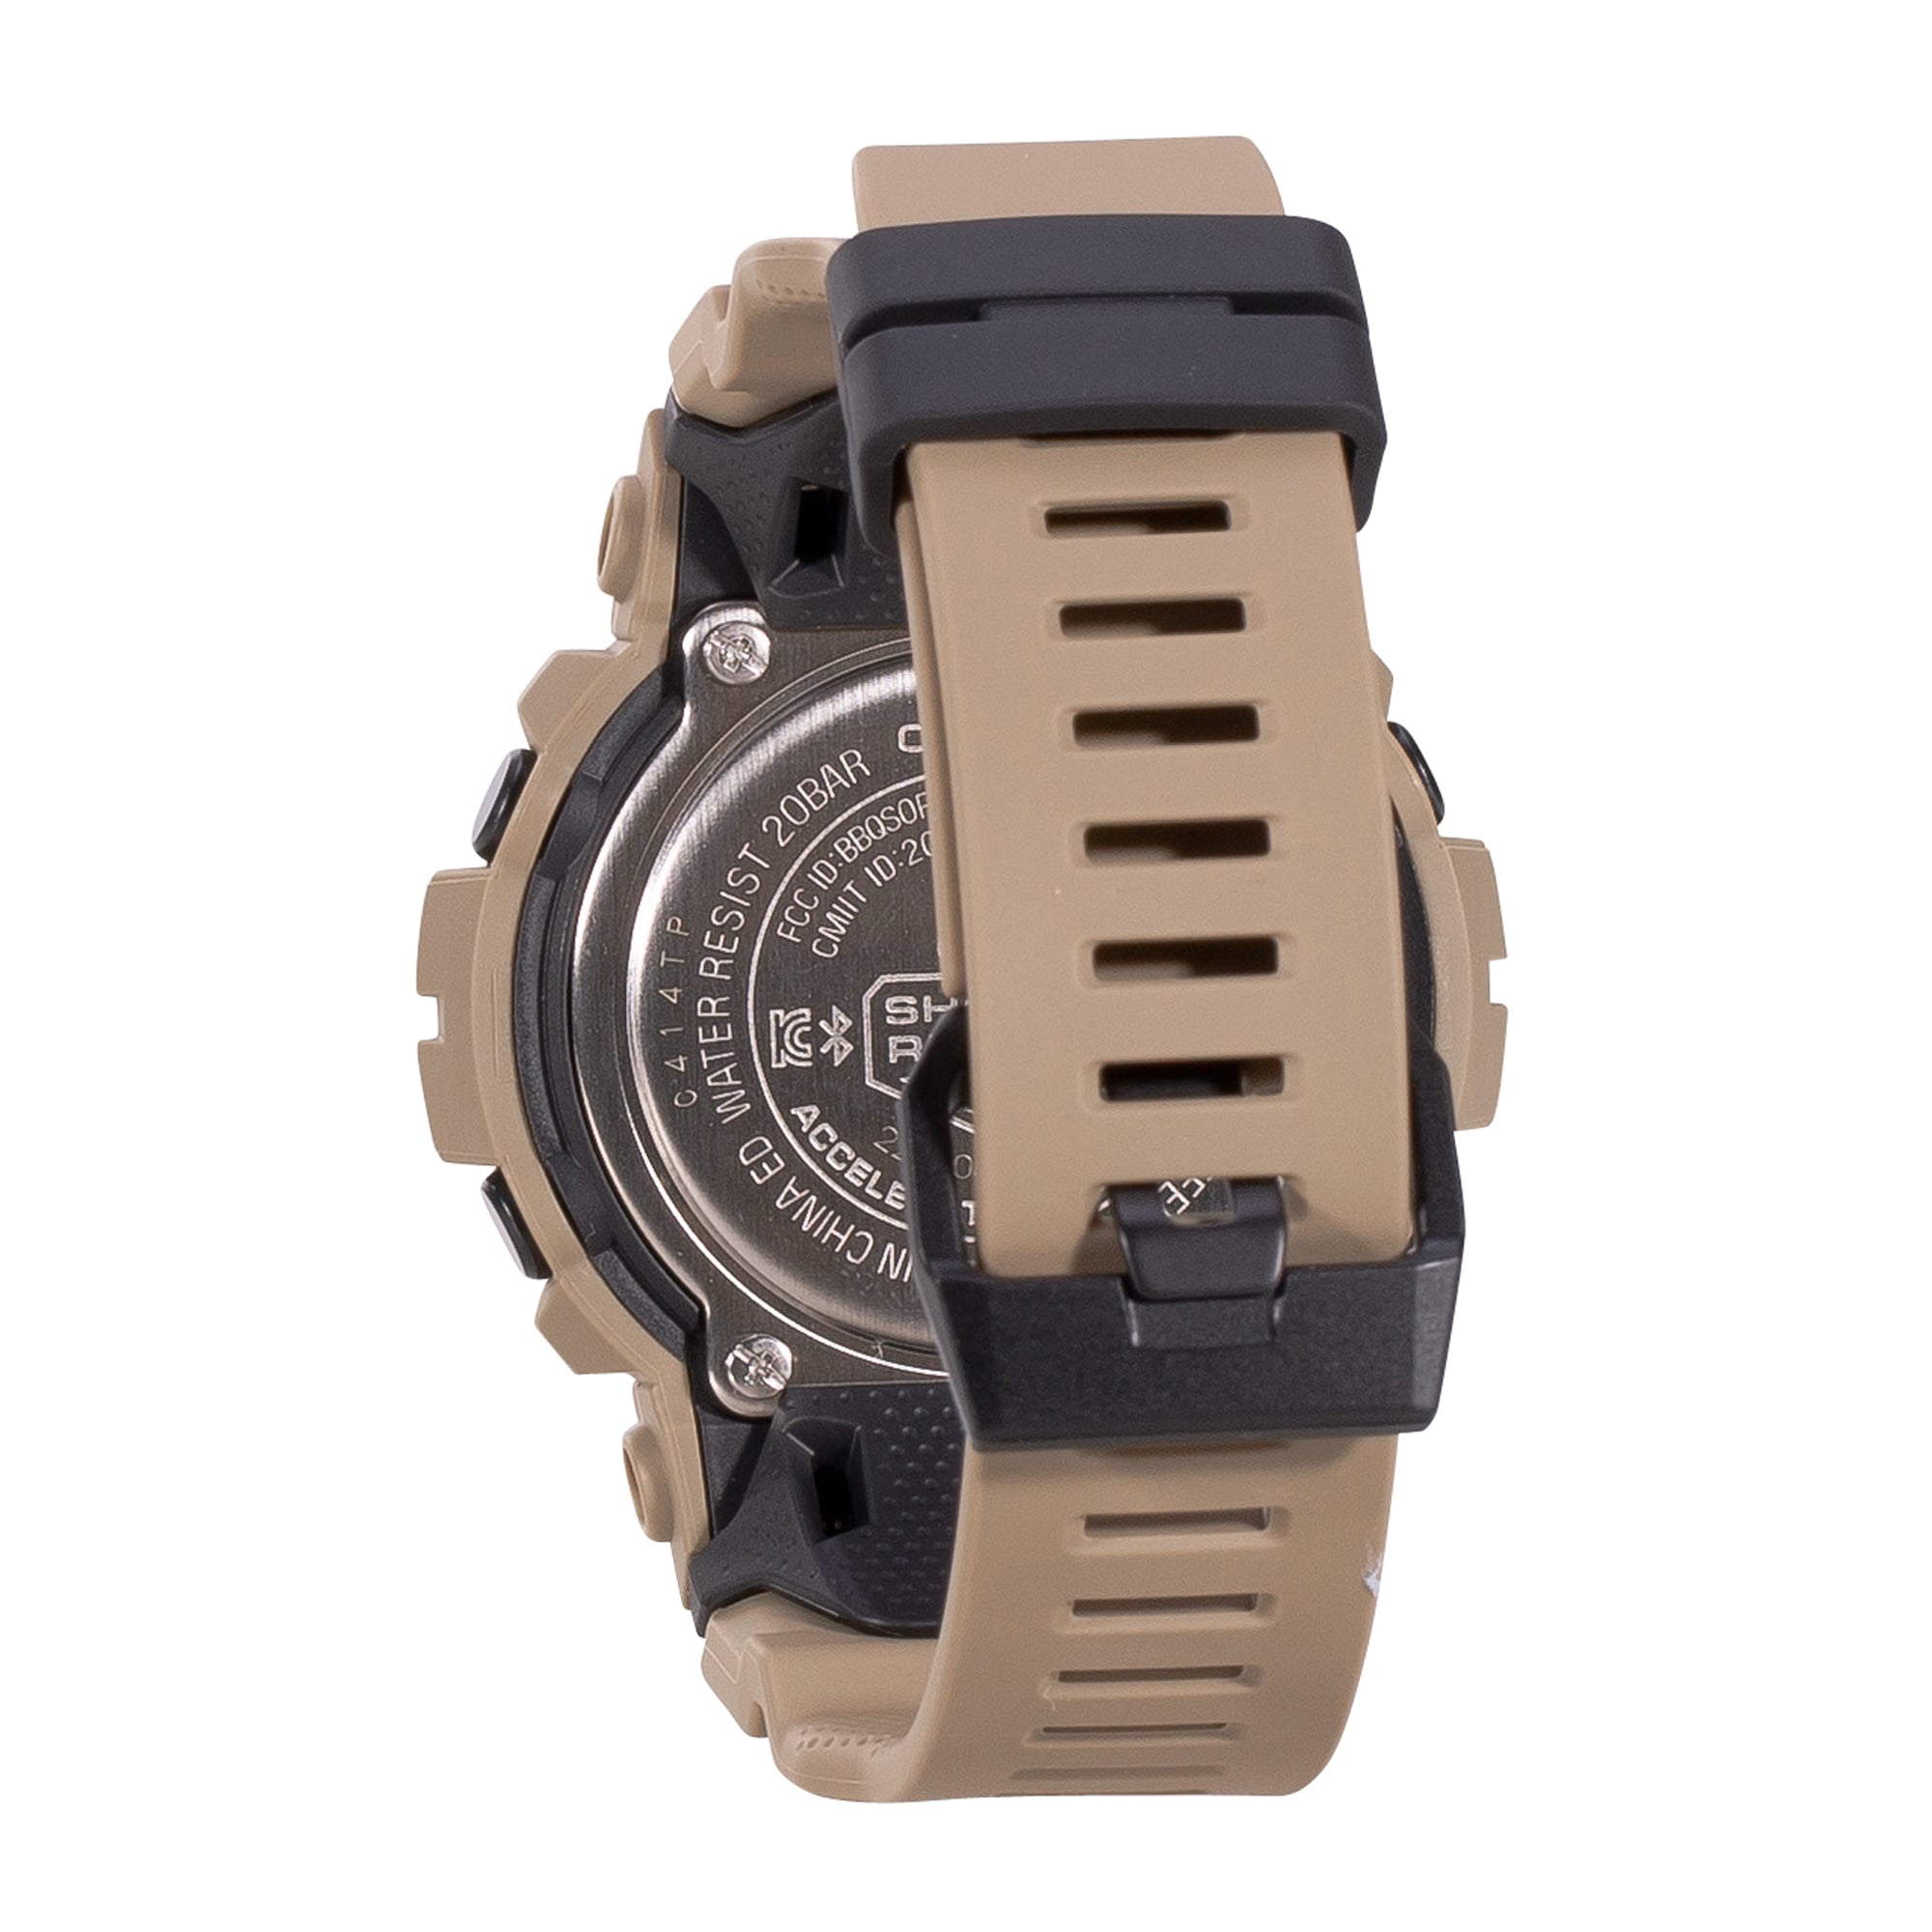 Casio G-Shock th Purchase Watch coyote by G-Squad GBD-800UC-5ER